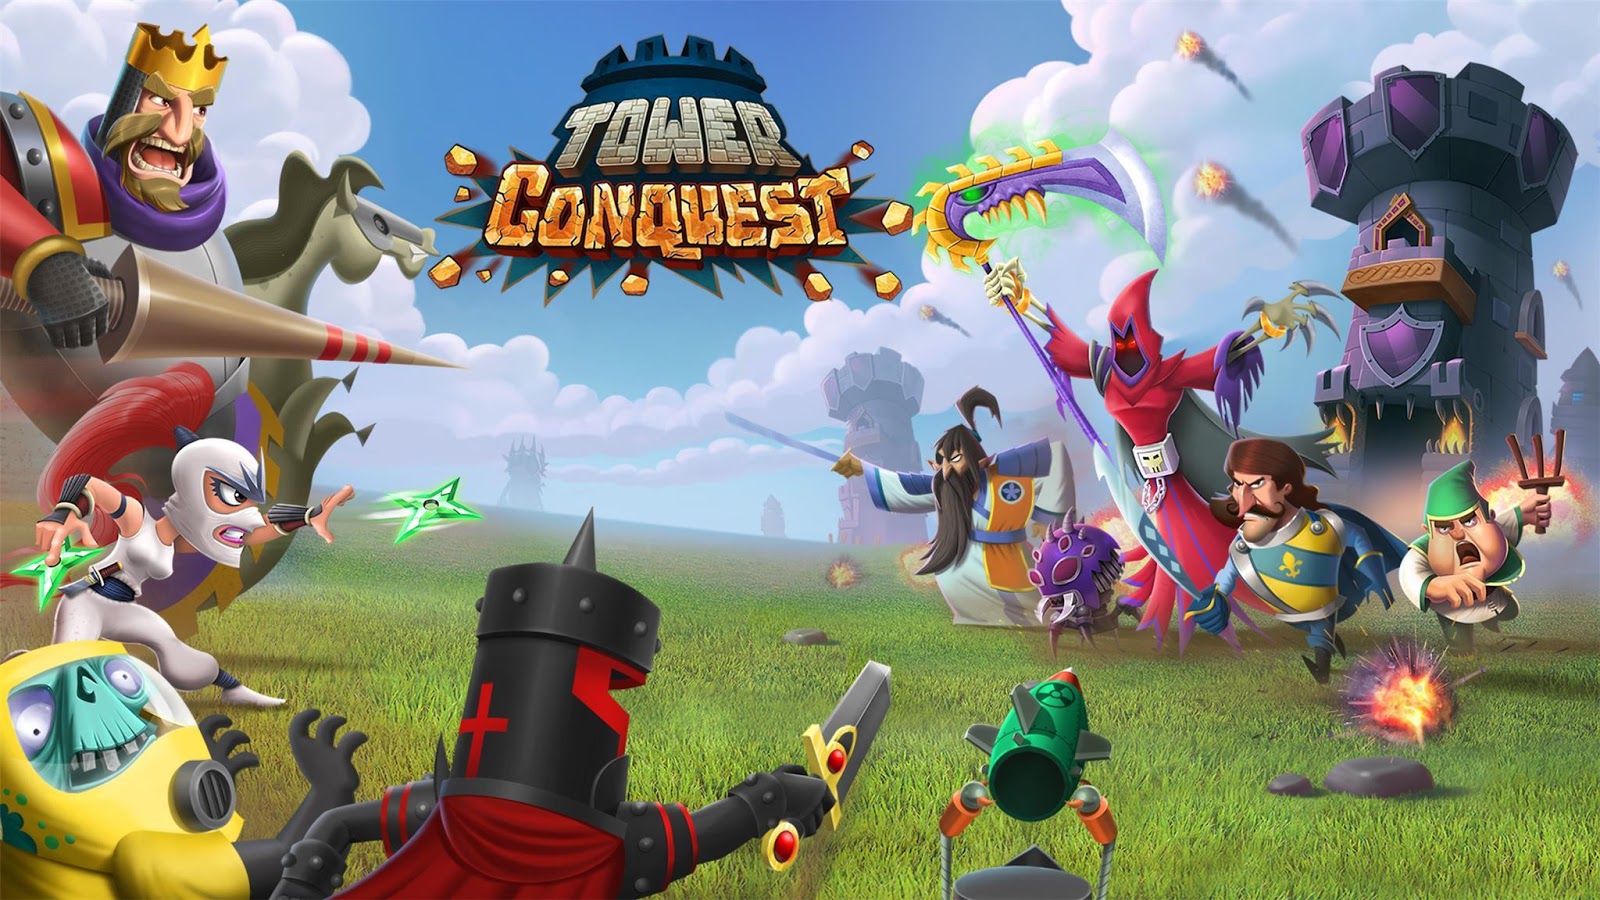 Tower Conquest 22.00.60